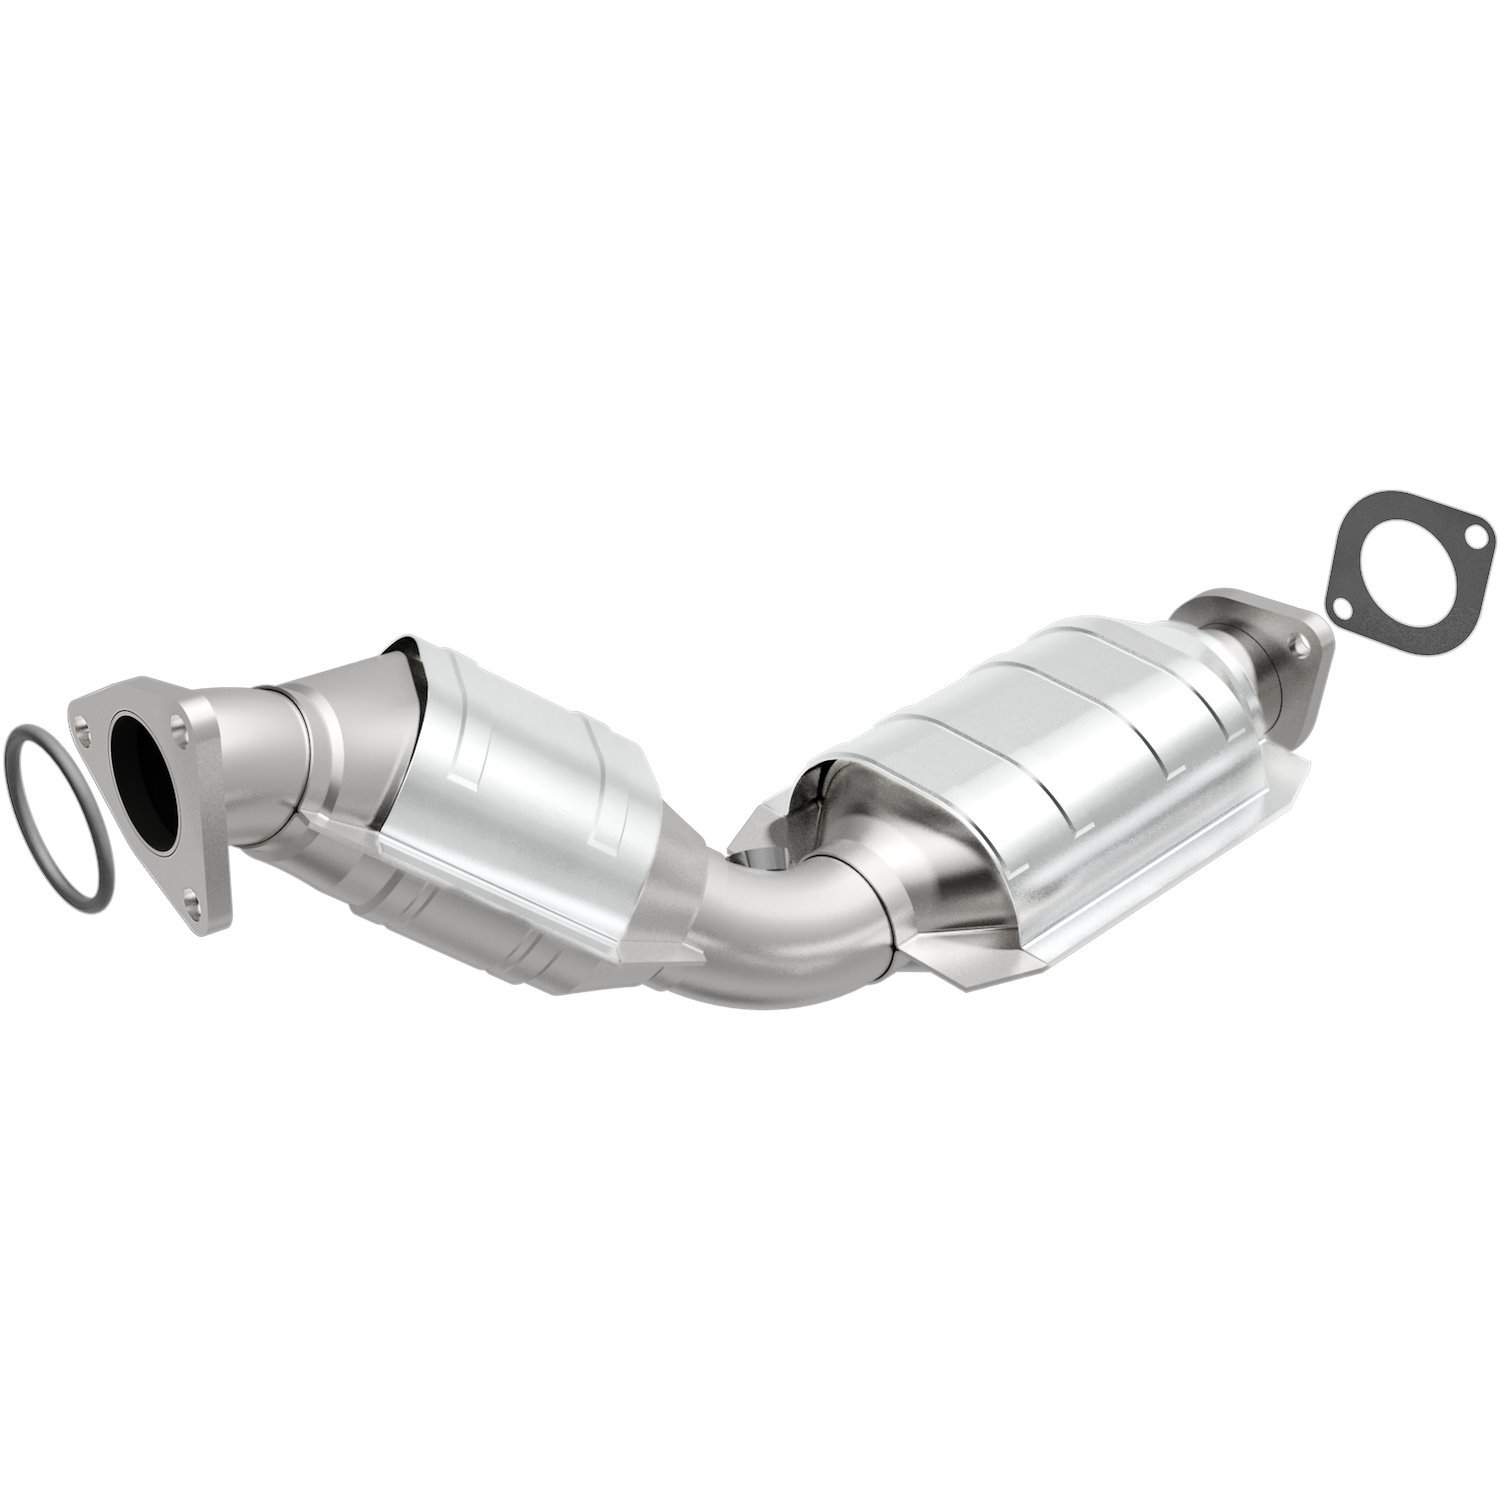 OEM Grade Federal / EPA Compliant Direct-Fit Catalytic Converter 51601